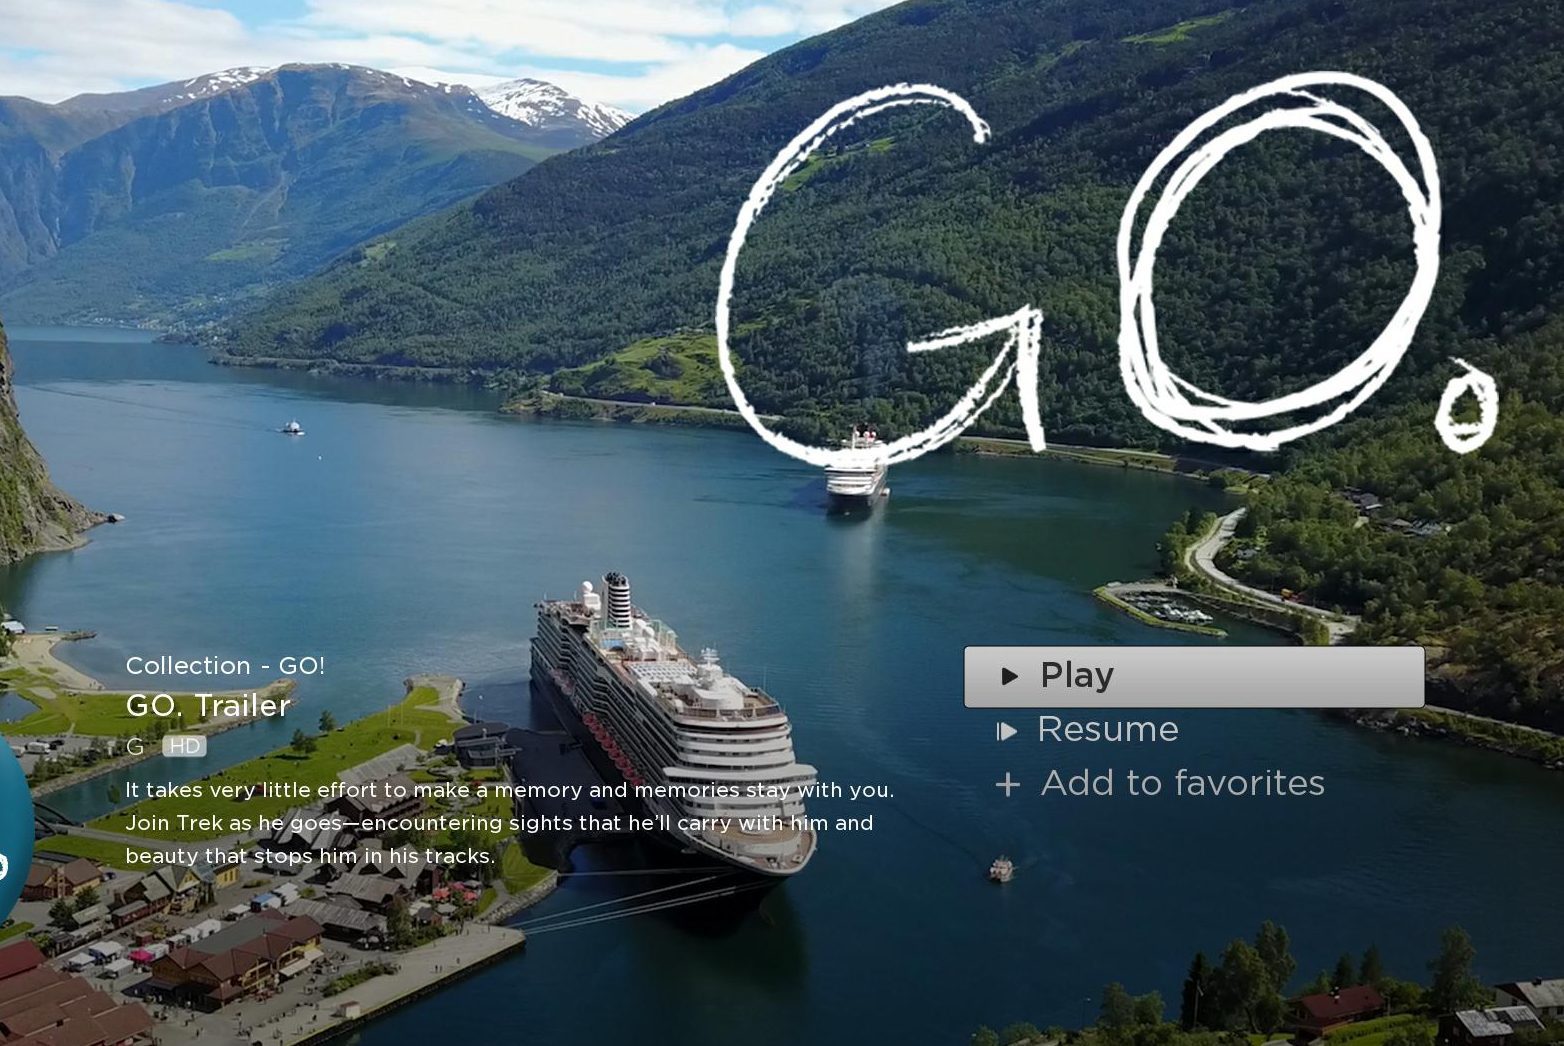 Carnival is launching a digital streaming channel to deliver its original content. Pictured is the series "GO" as seen on a Roku player.